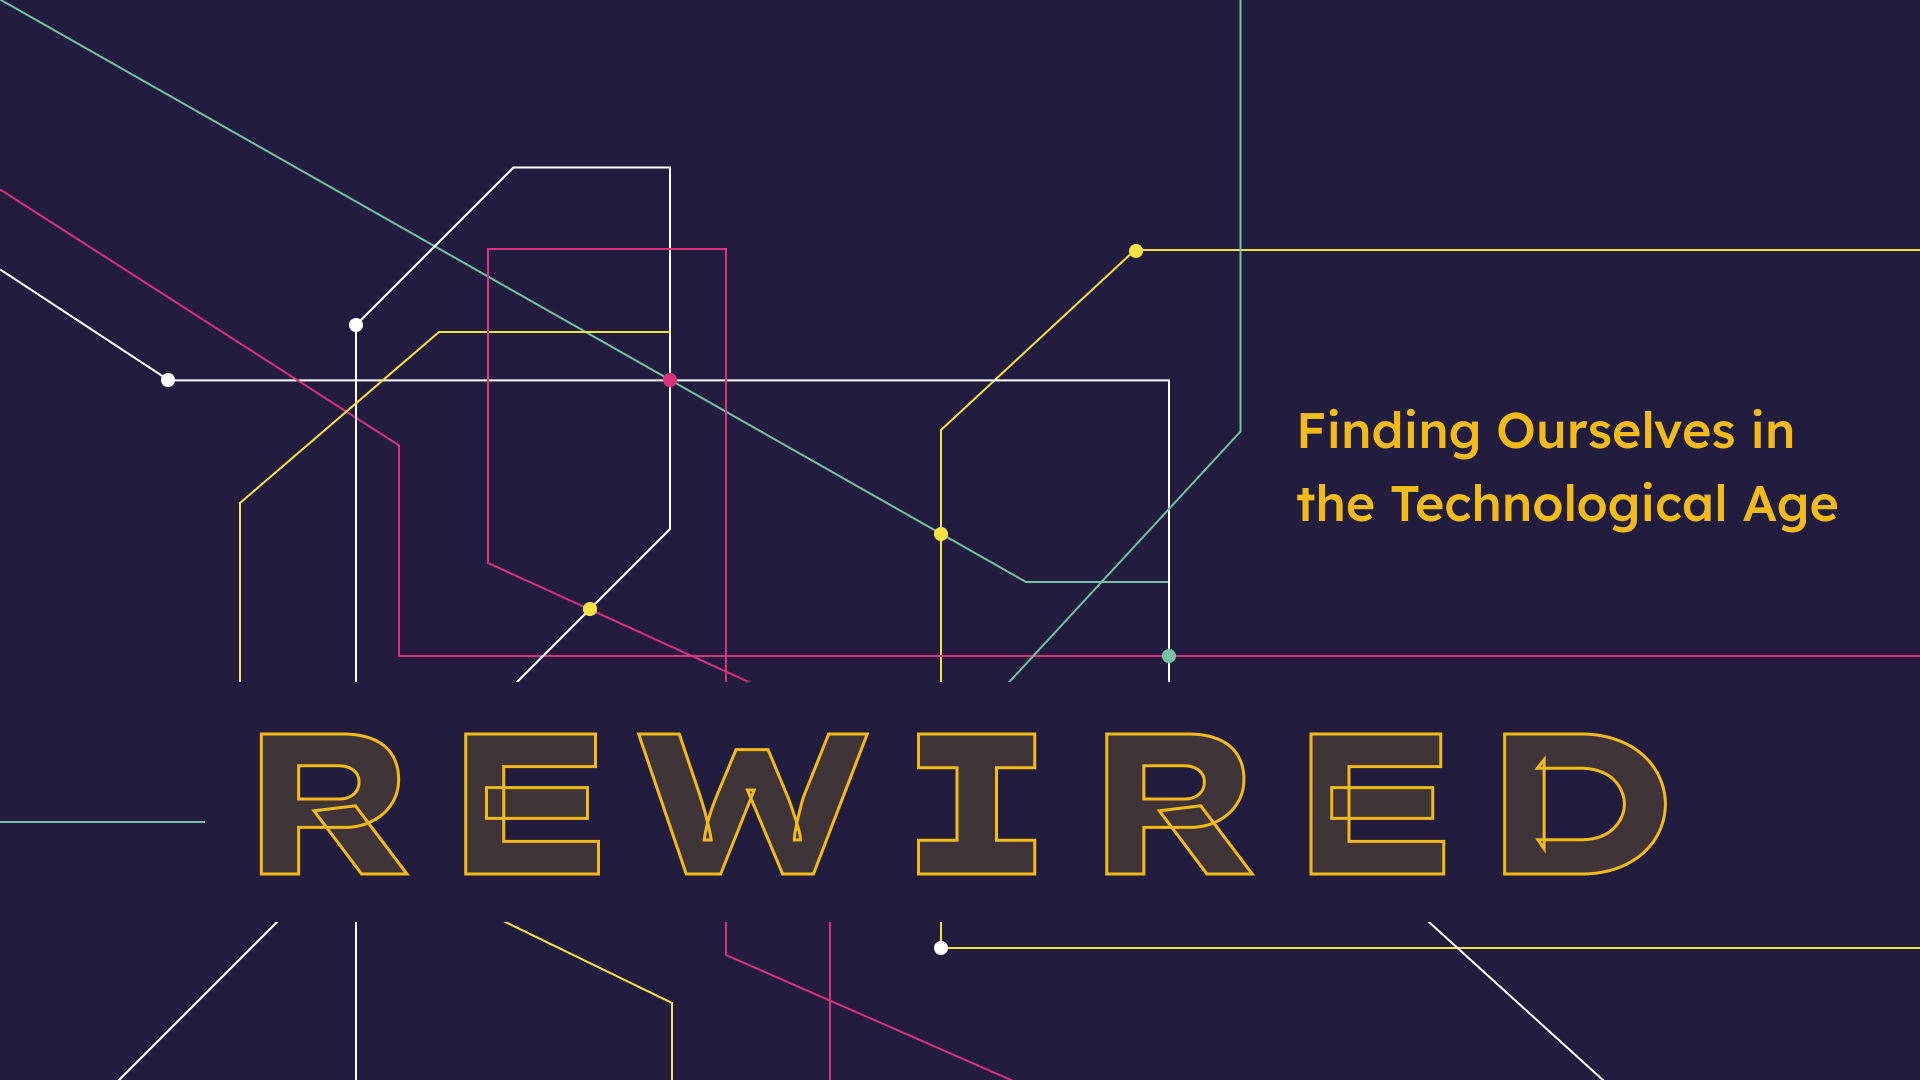 Rewired - Finding Ourselves in the Technological Age